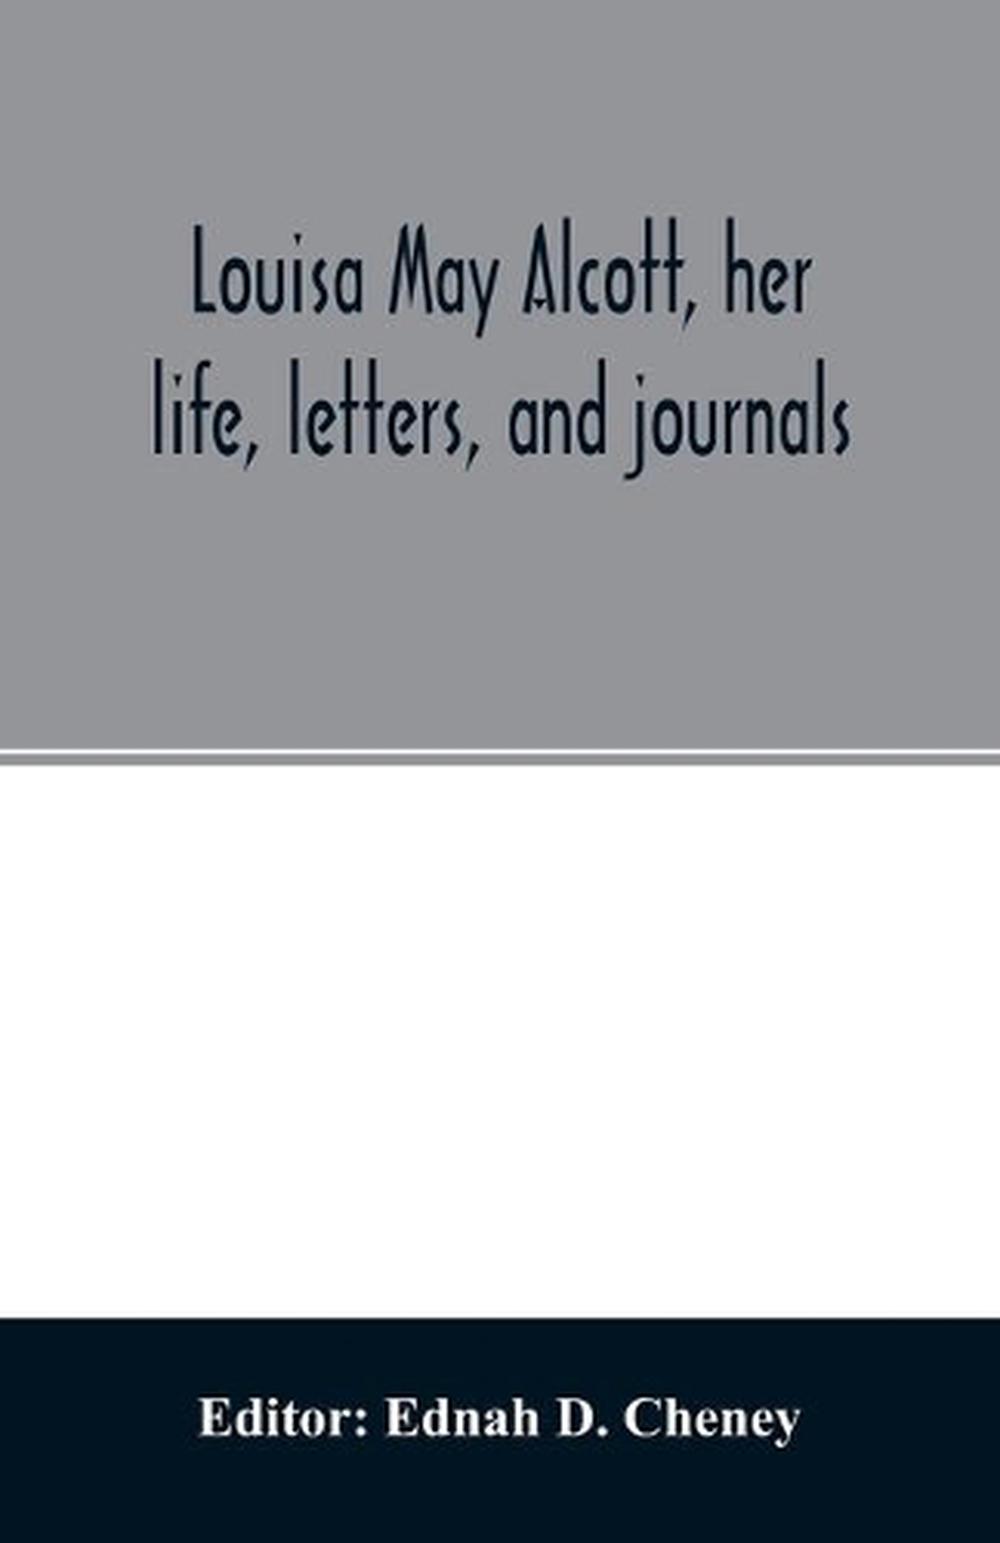 Louisa May Alcott, Her Life, Letters, and Journals (English) Paperback Book Free | eBay